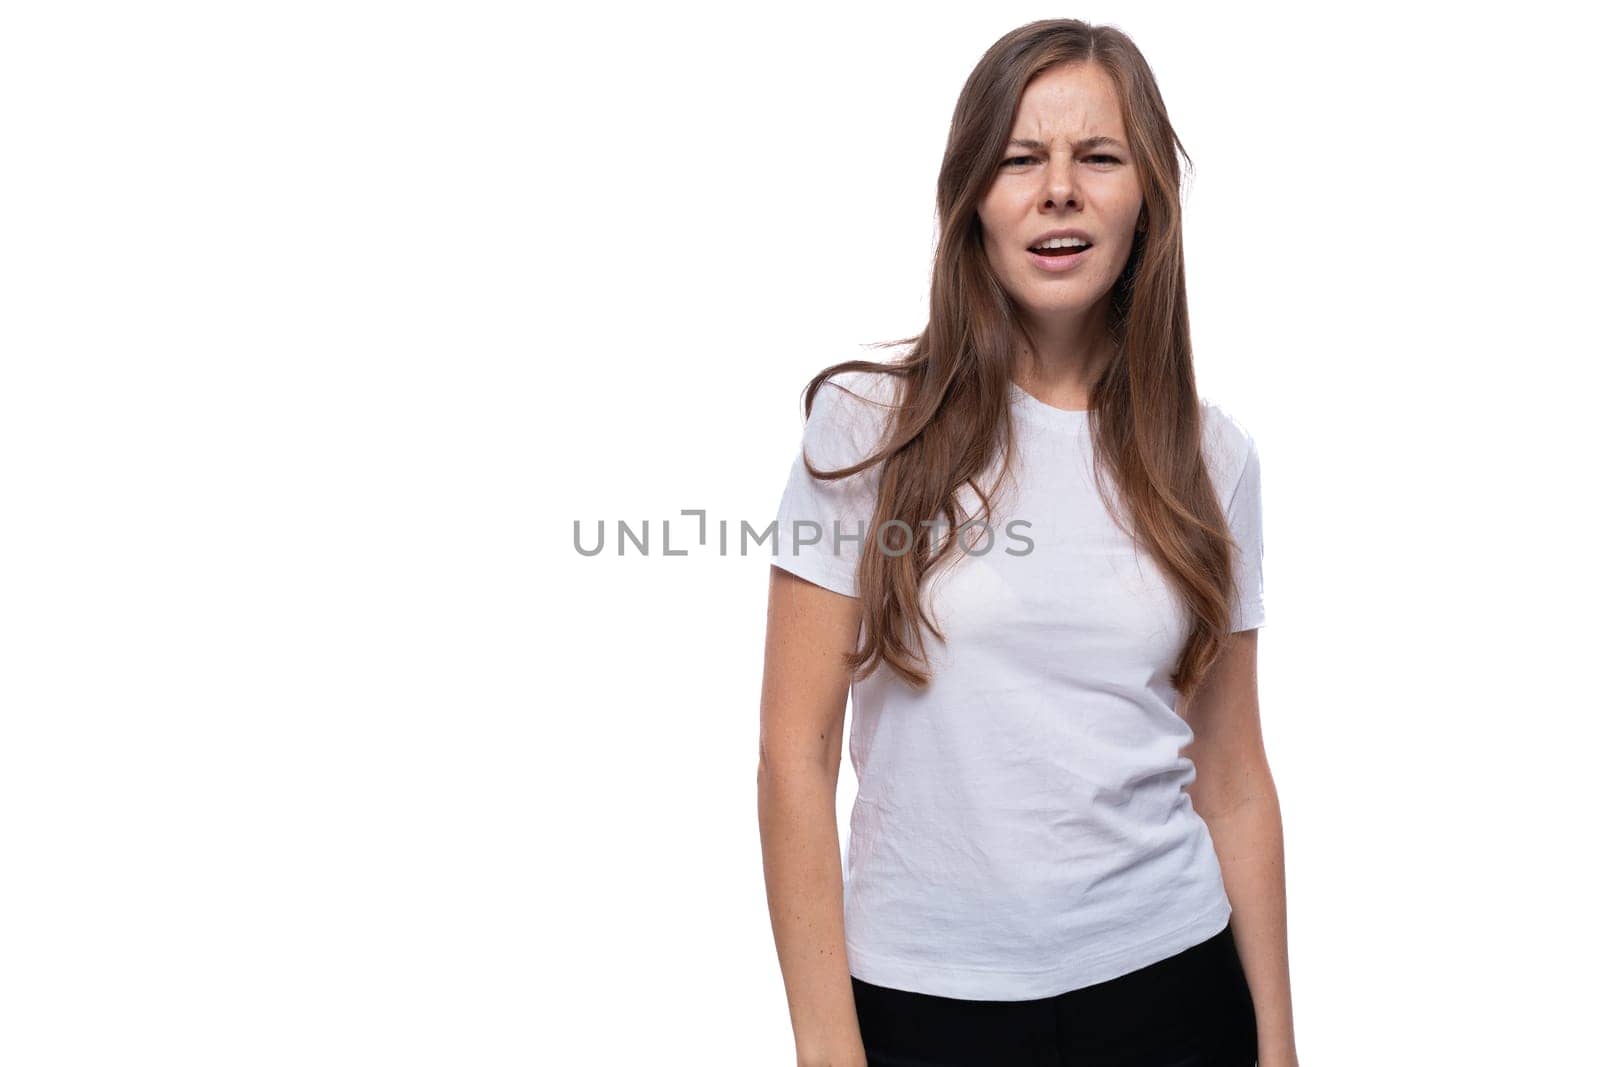 European young woman with straight brown hair wearing a white T-shirt by TRMK